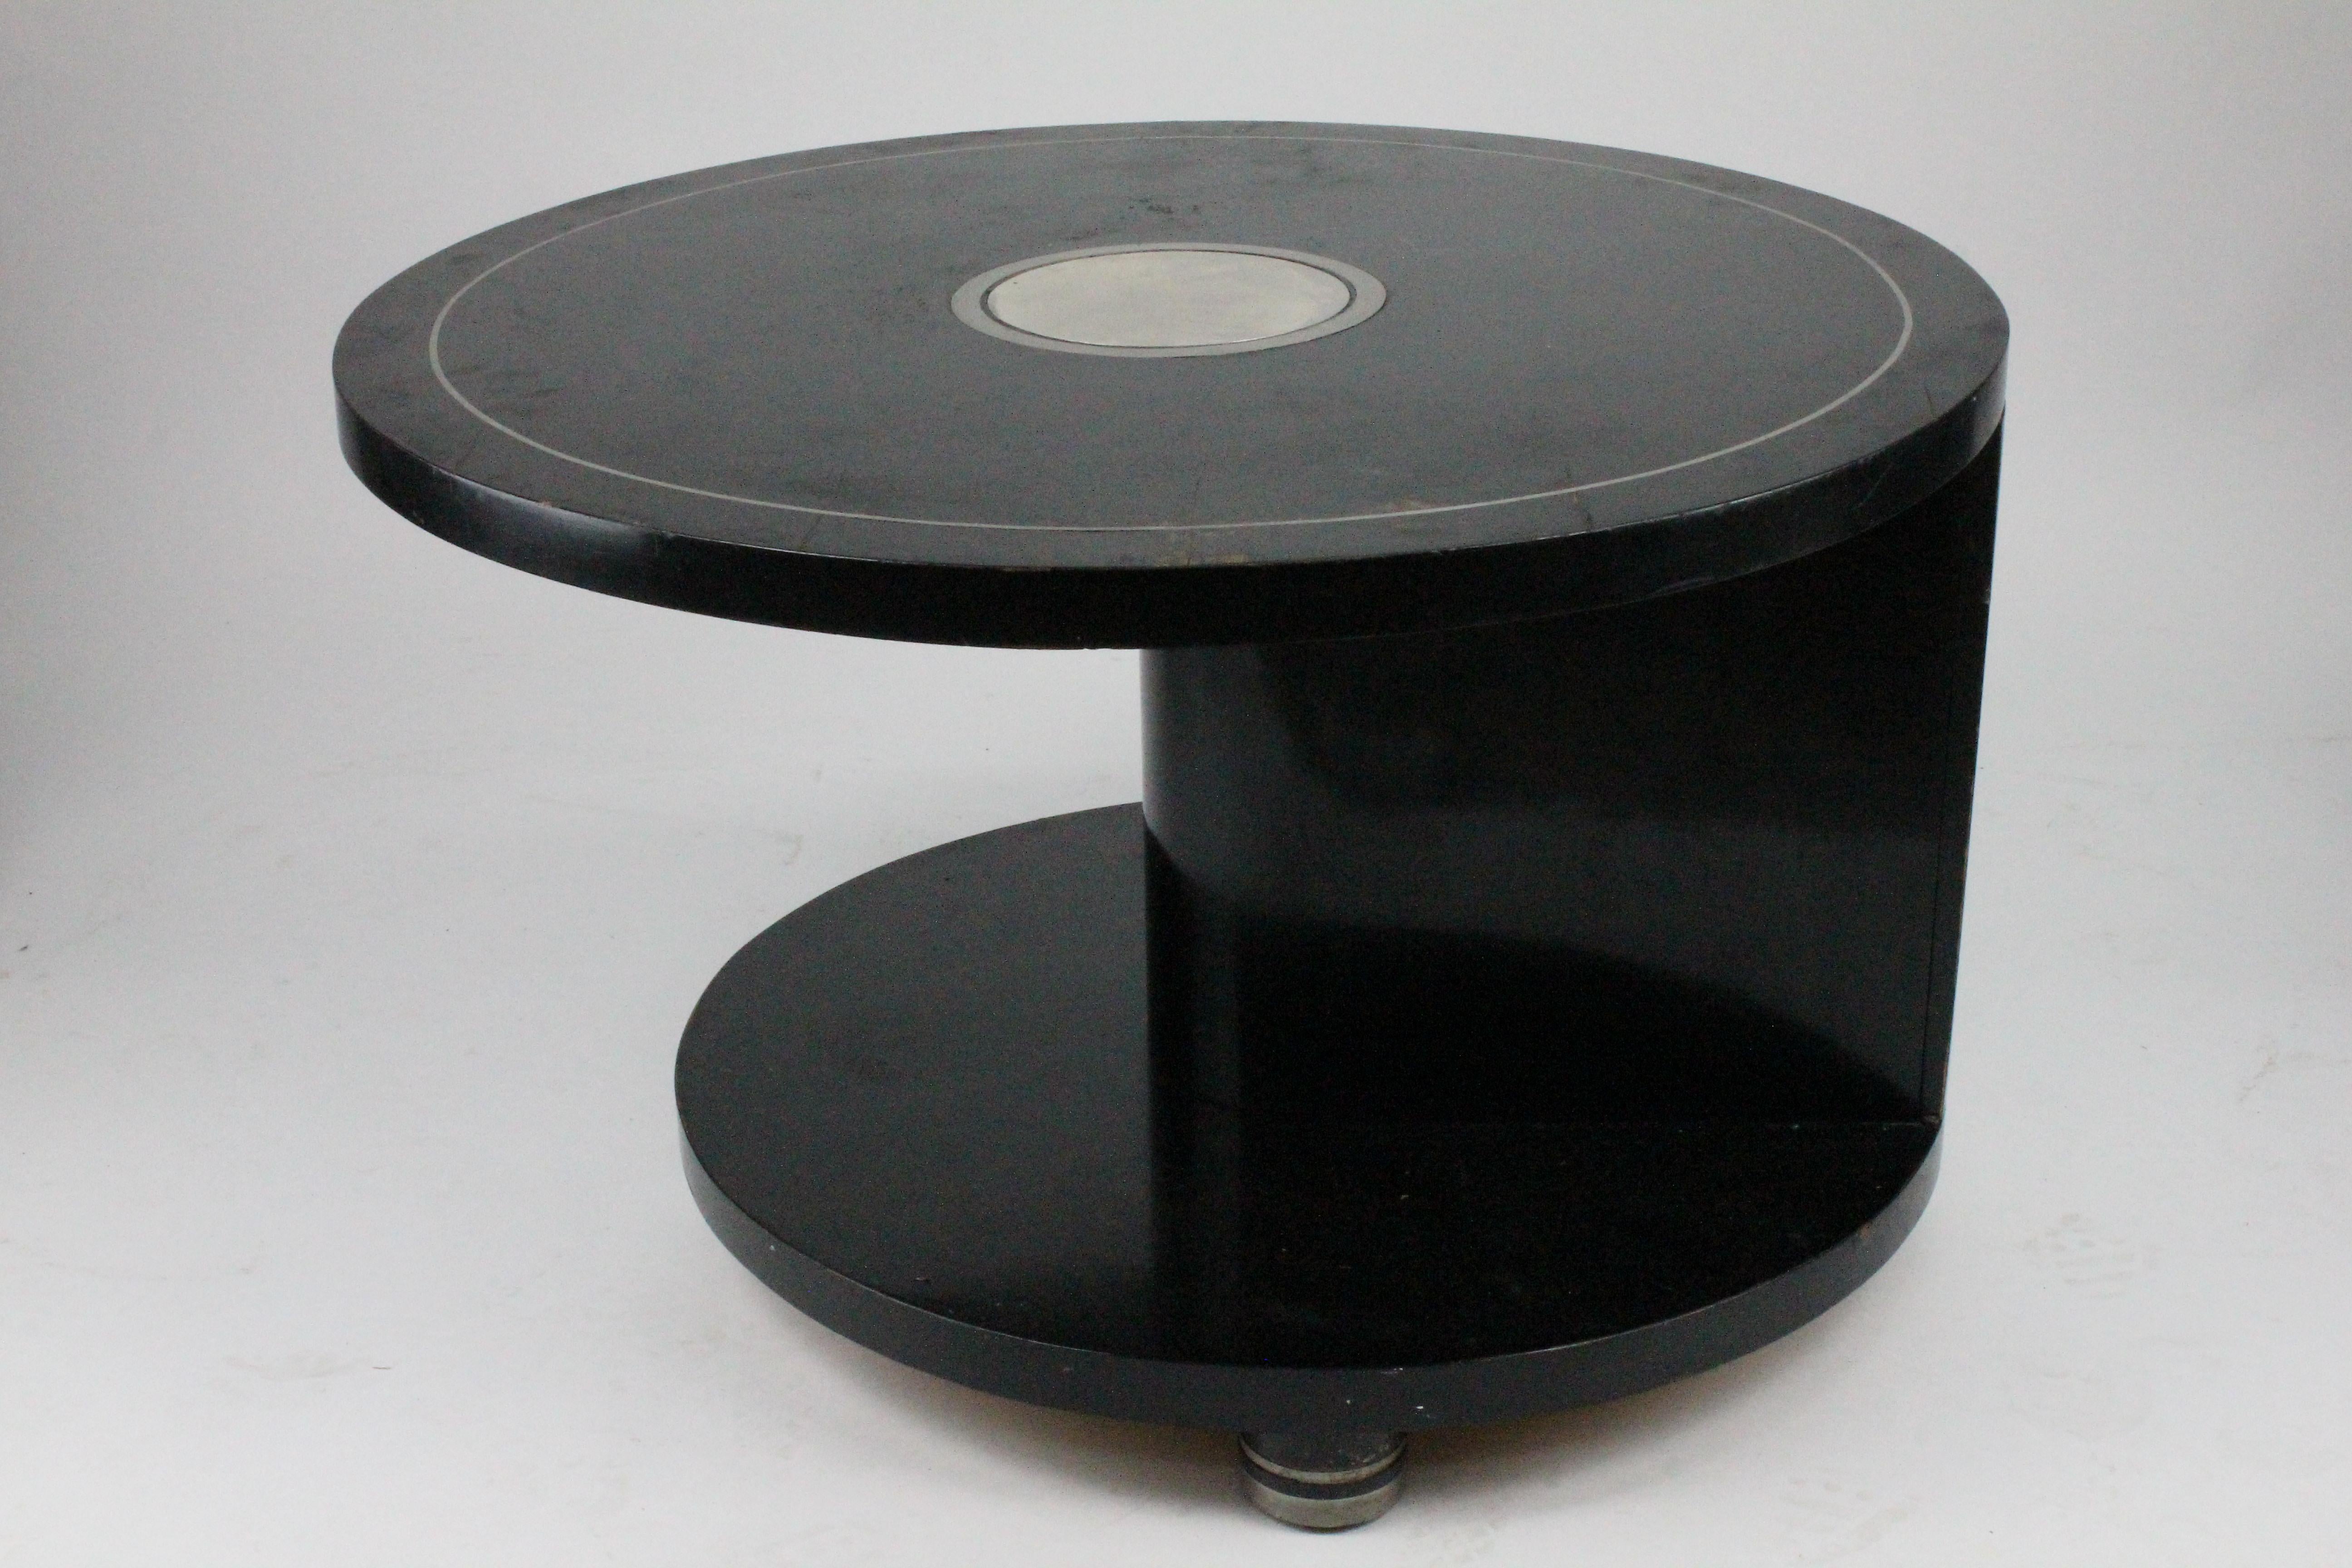 Alvar Andersson Table, 1933, Swedish, Black Painted with Pewter Inlays (Mitte des 20. Jahrhunderts)